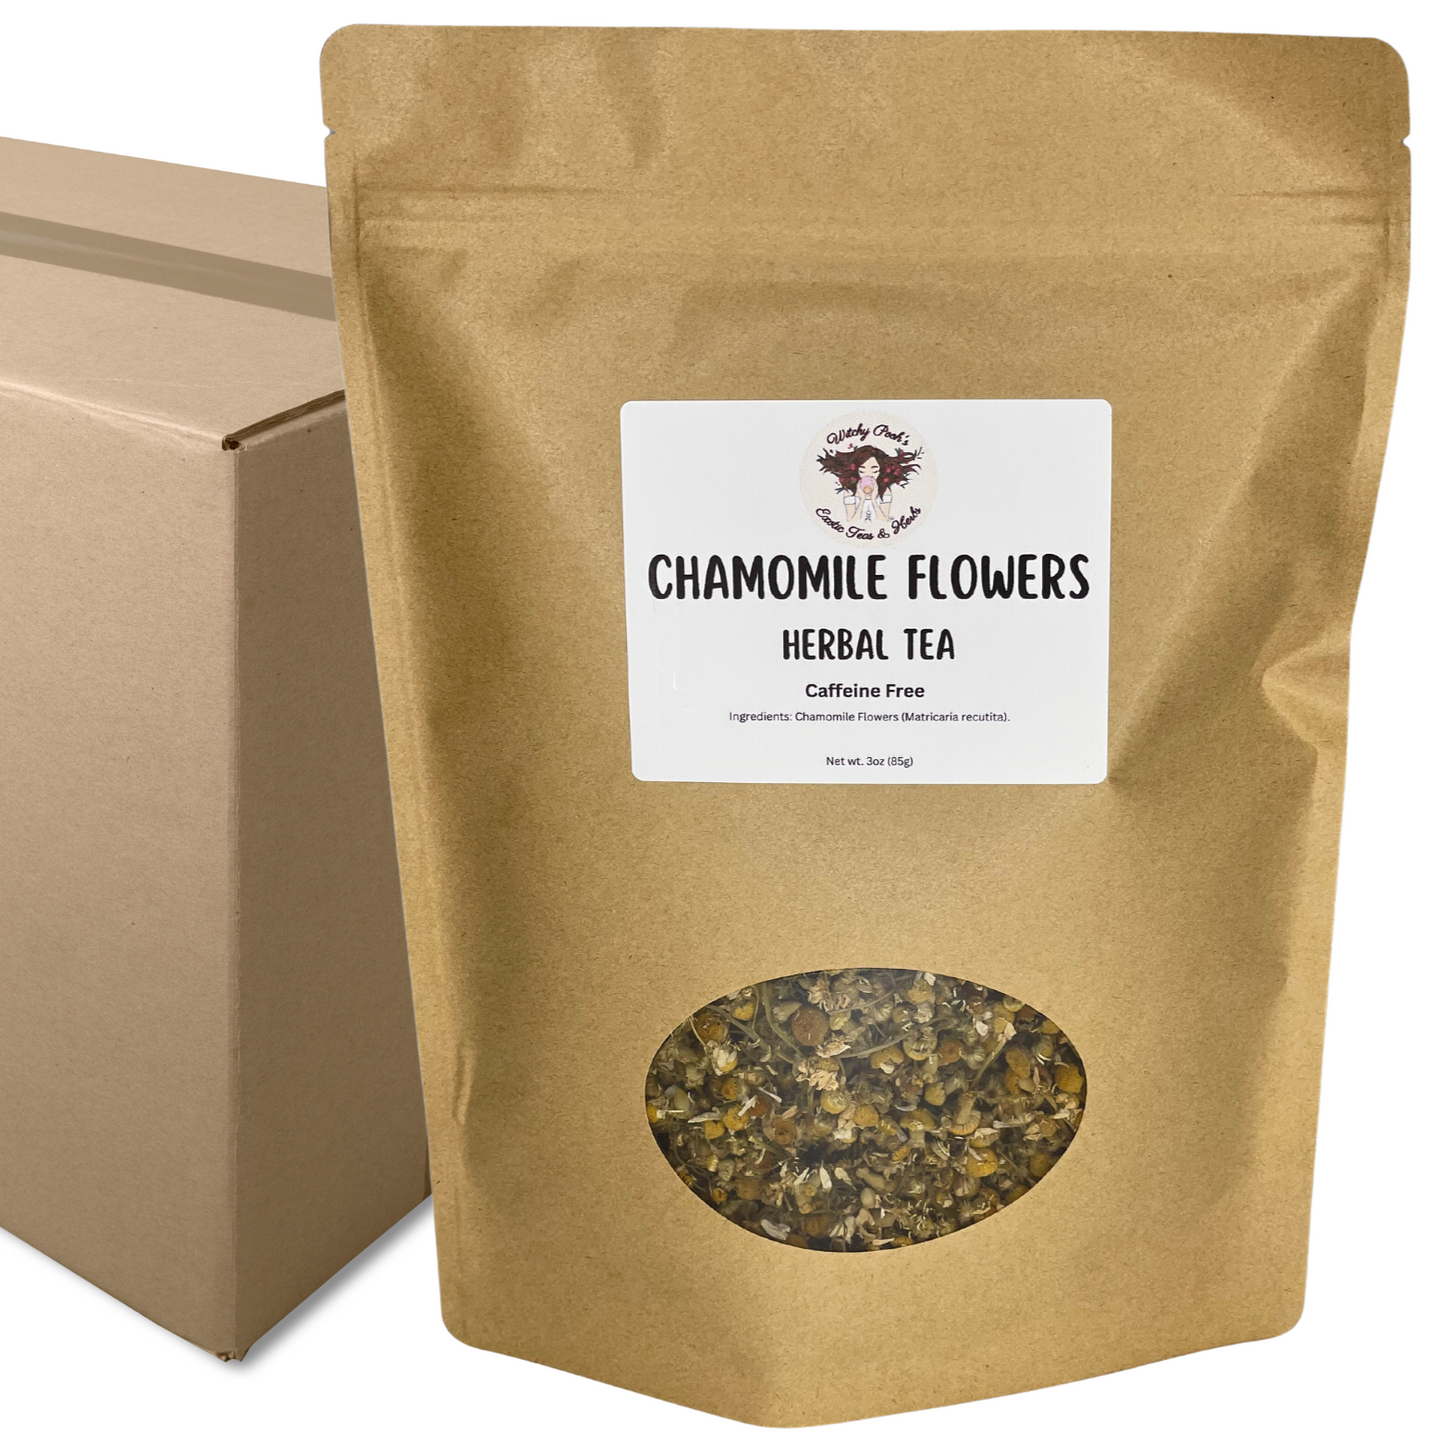 Witchy Pooh's Chamomile Flowers Loose Leaf Herbal Tea, Caffeine Free, For Stress Relief and Sleep Aid-18